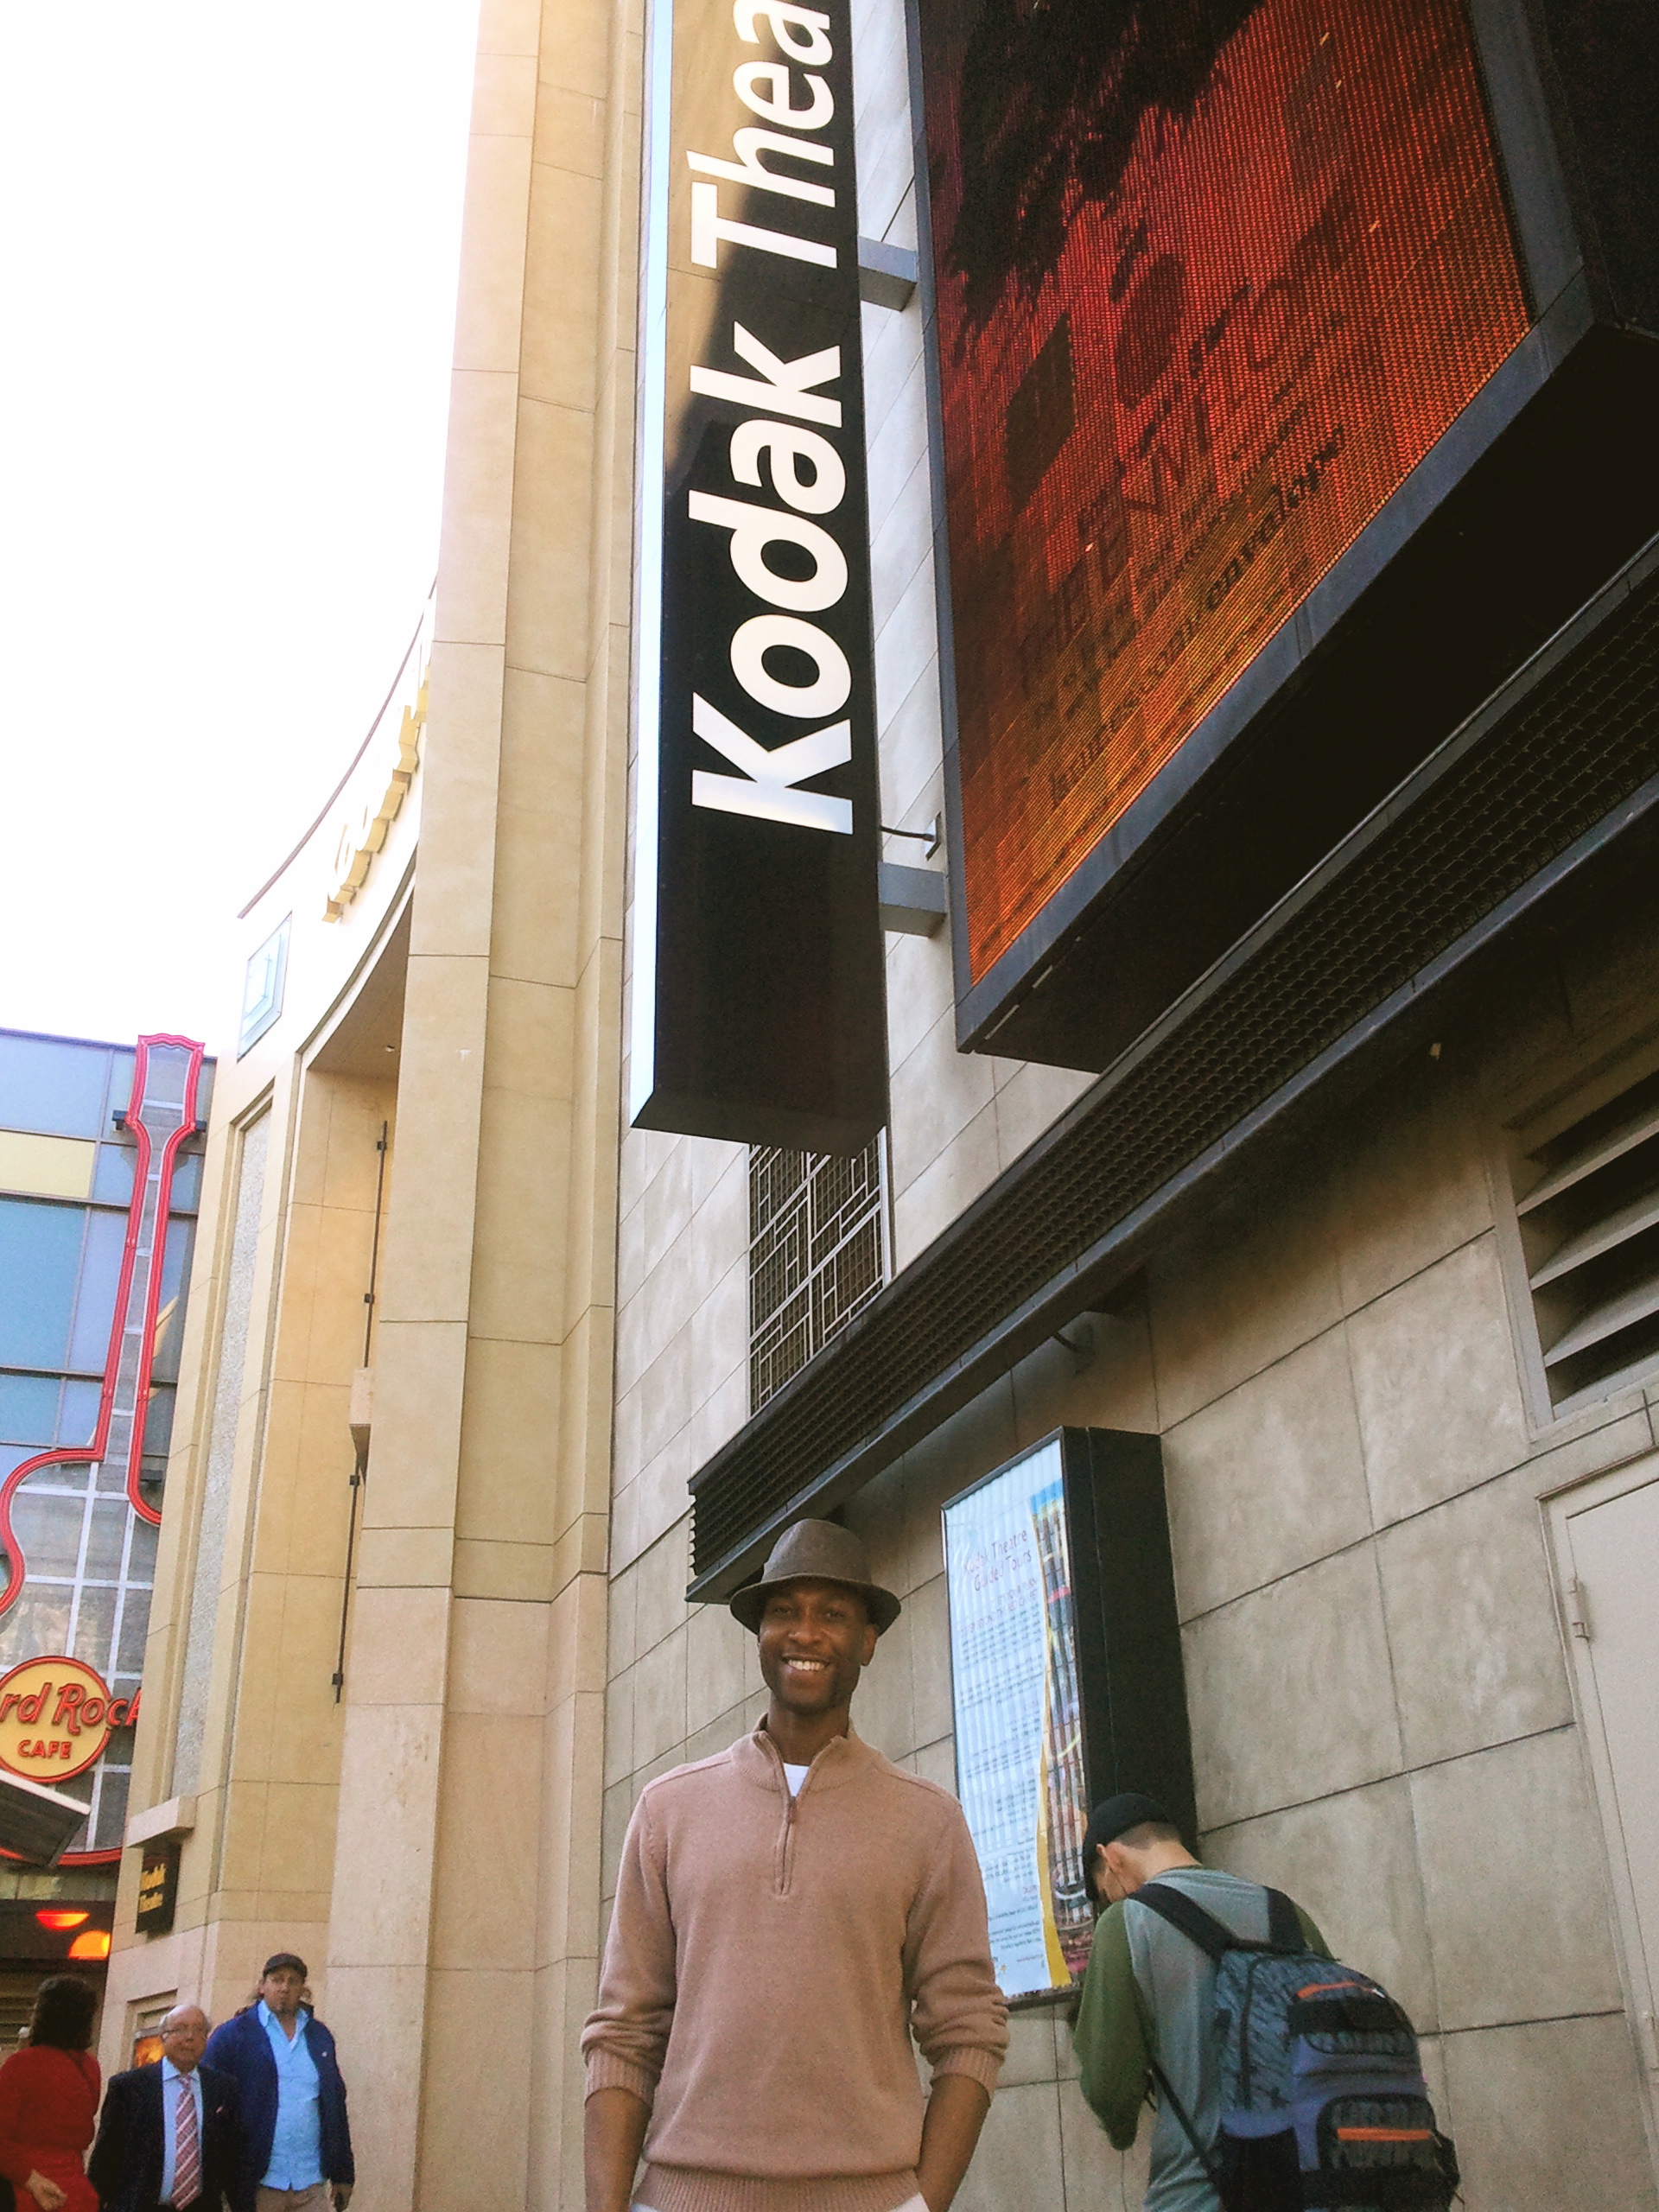 Gregory at the Nokia Theatre on Hollywood Boulevard 2012